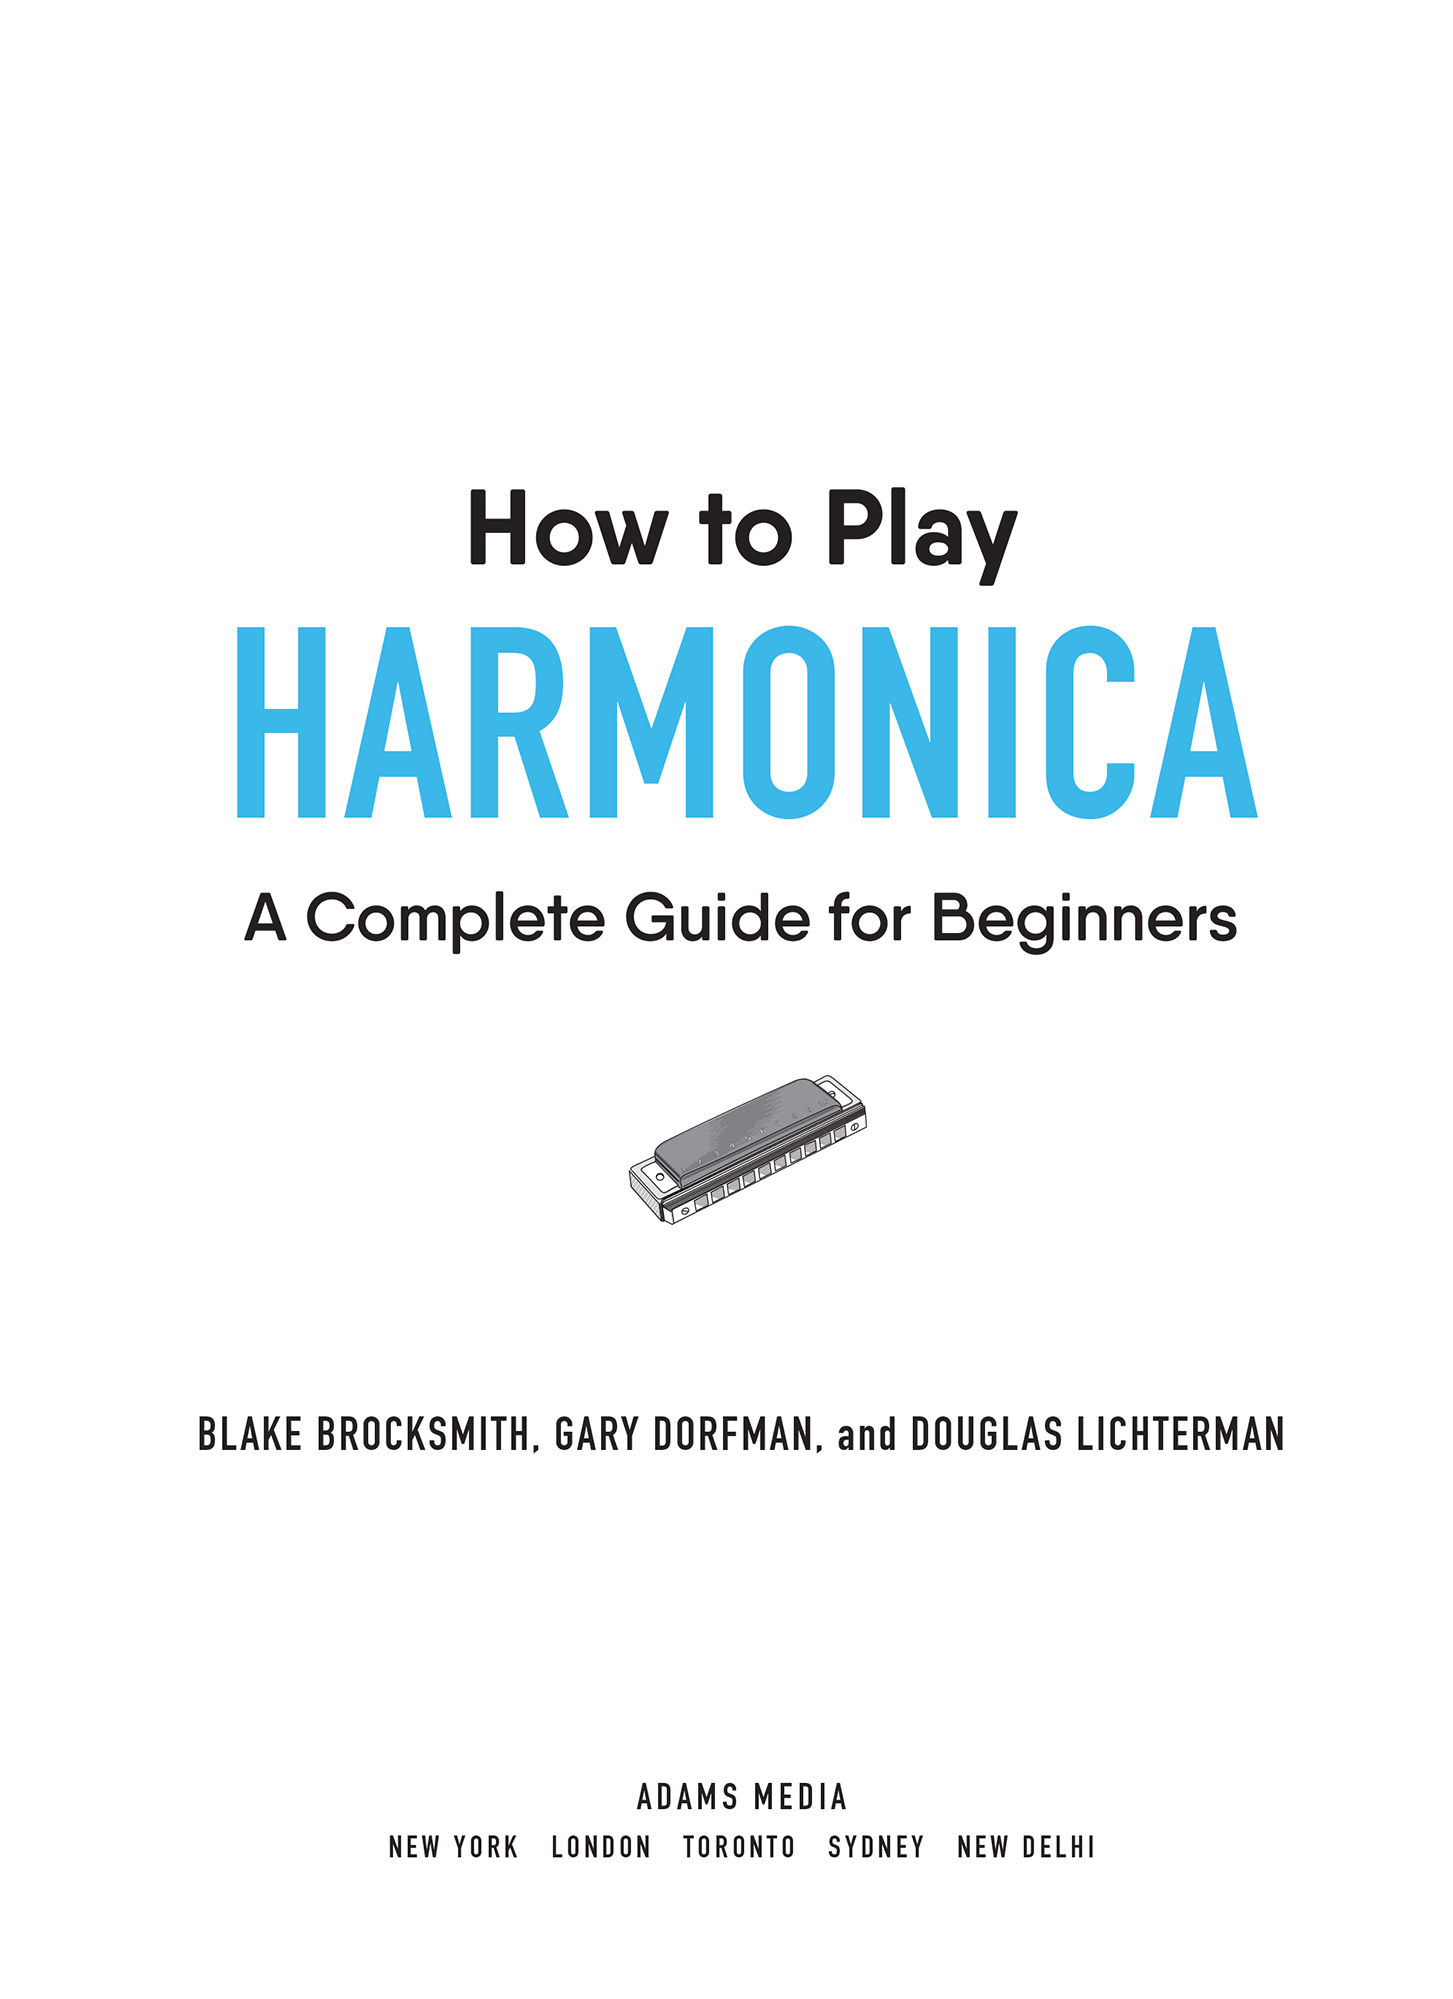 How to play harmonica a complete guide for beginners - image 2